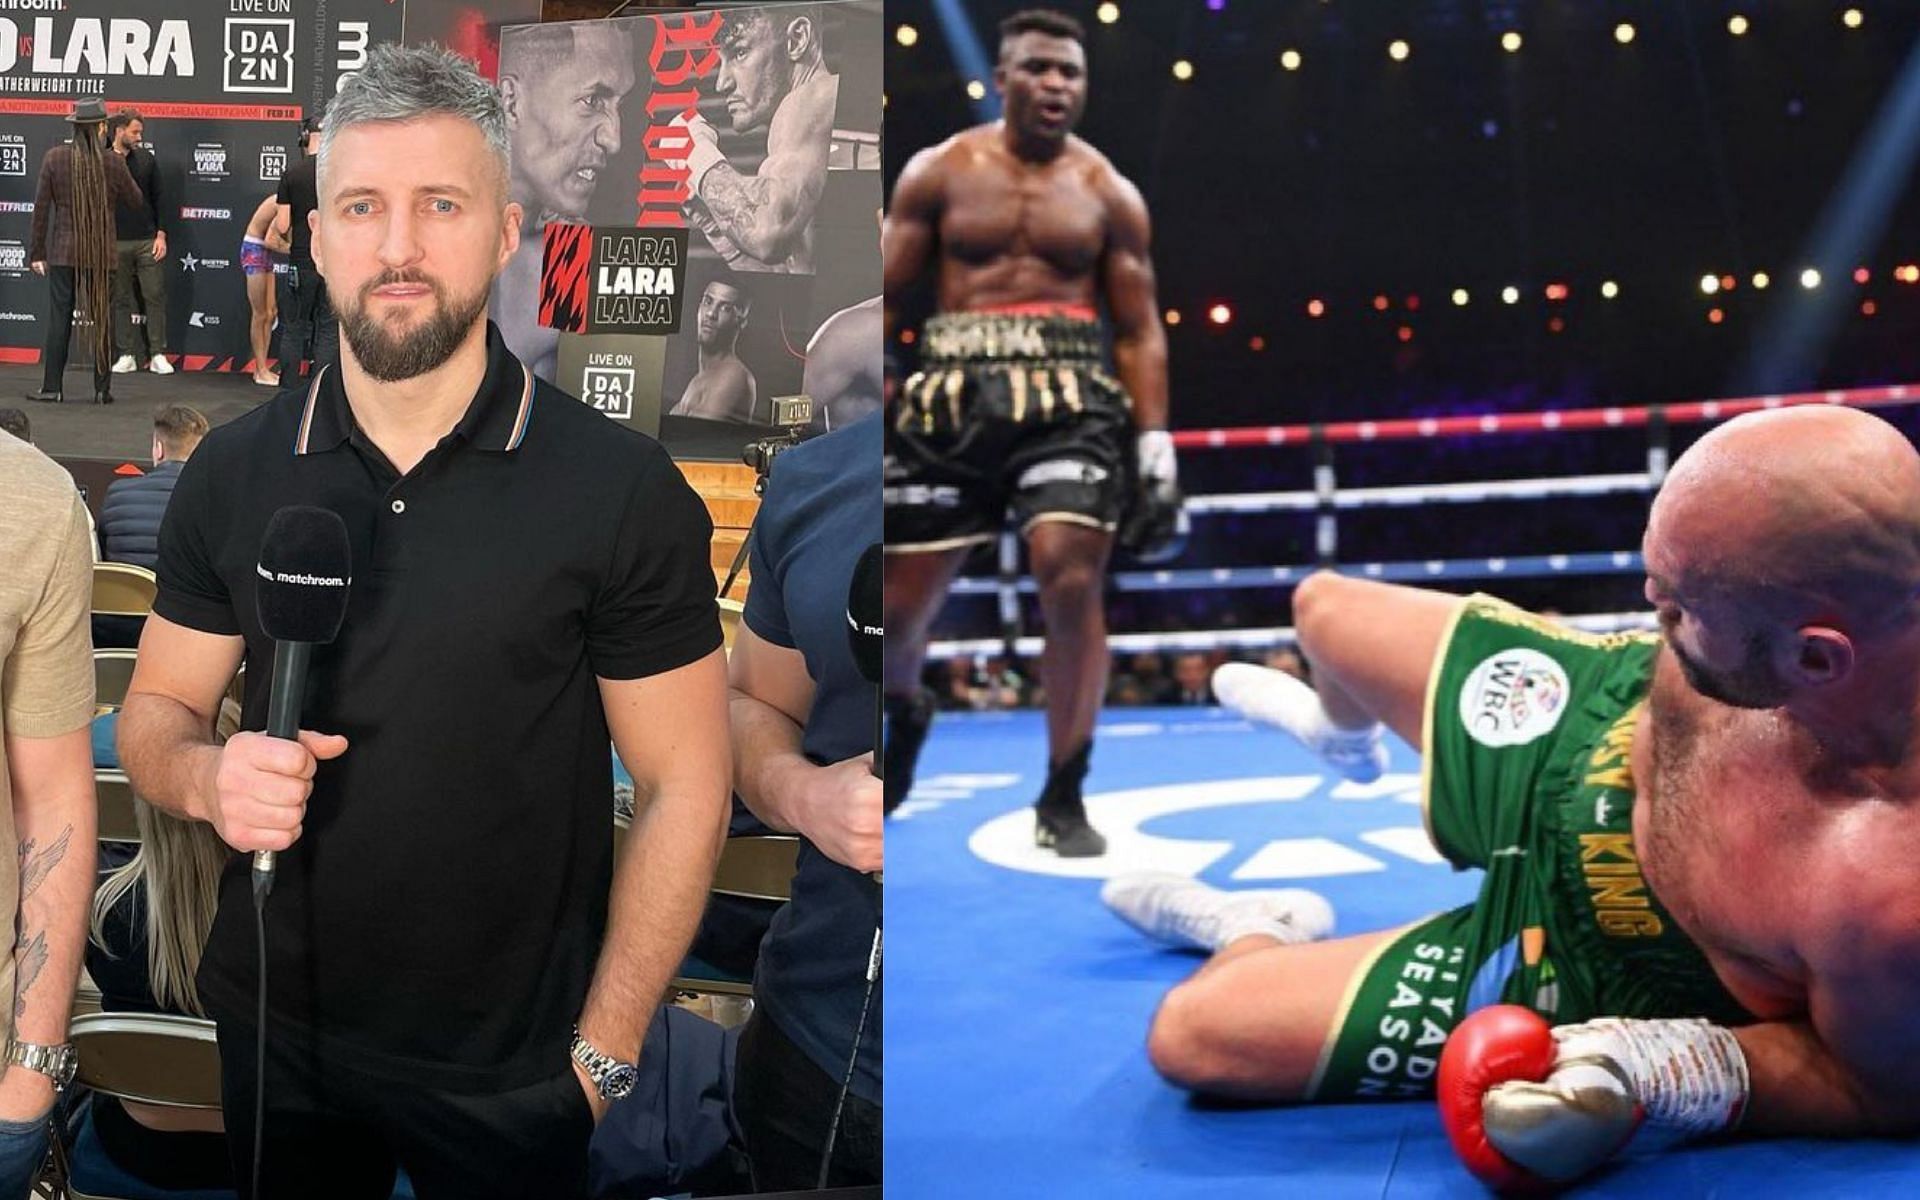 Carl Froch (left) and Francis Ngannou knocking down Tyson Fury (right) (Image credits @francisngannou and @carlcobrafroch on Instagram)